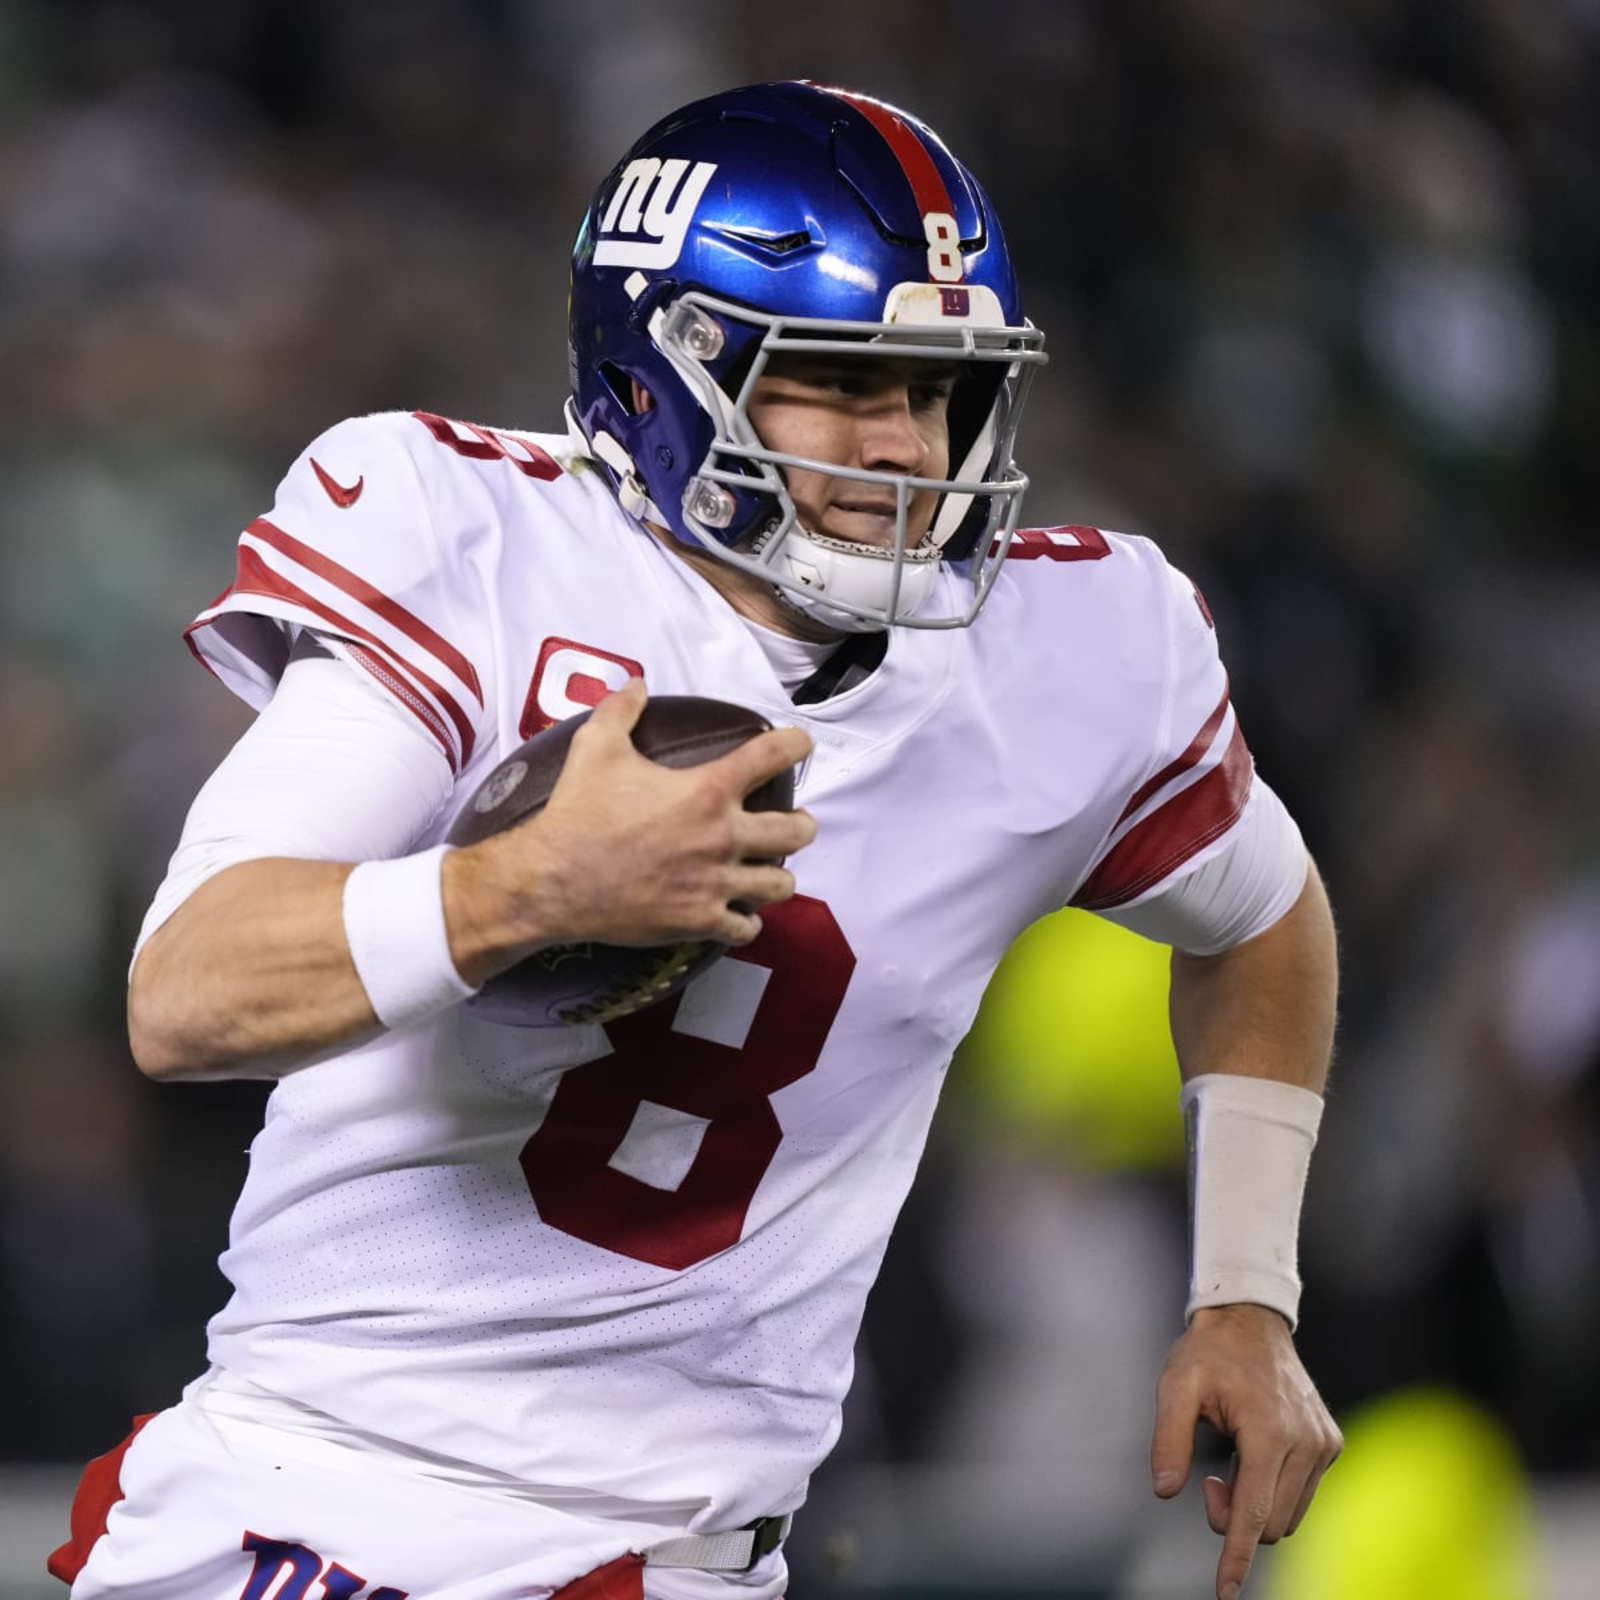 NY Giants schedule 2023: NFL reveals opponents, dates, times, analysis